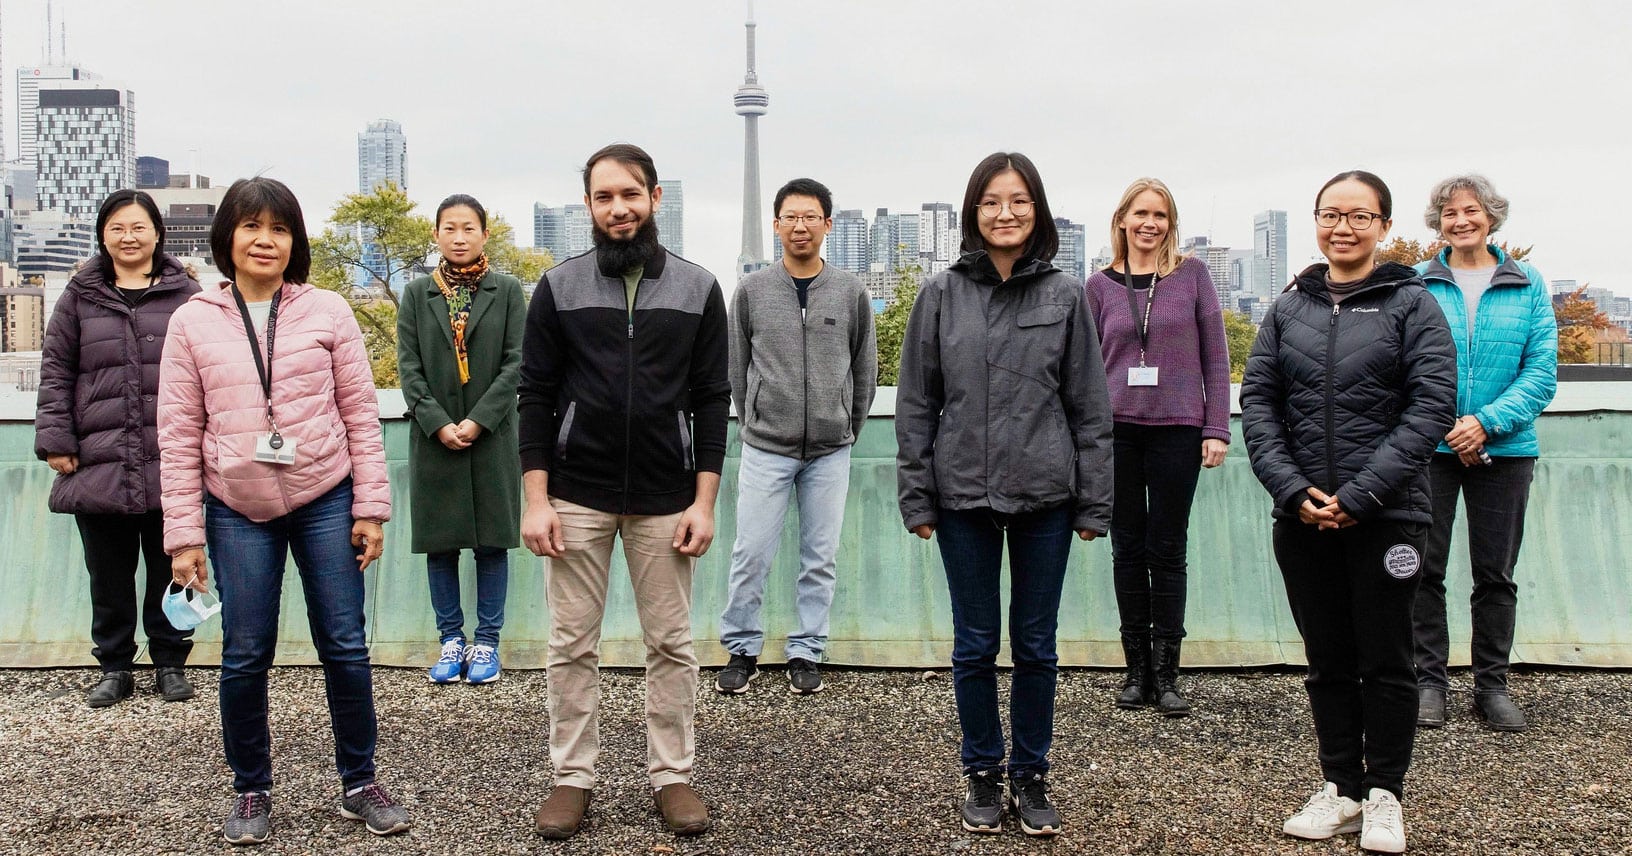 Nine people stand together on a rooftop. The CN Tower is visible behind them.